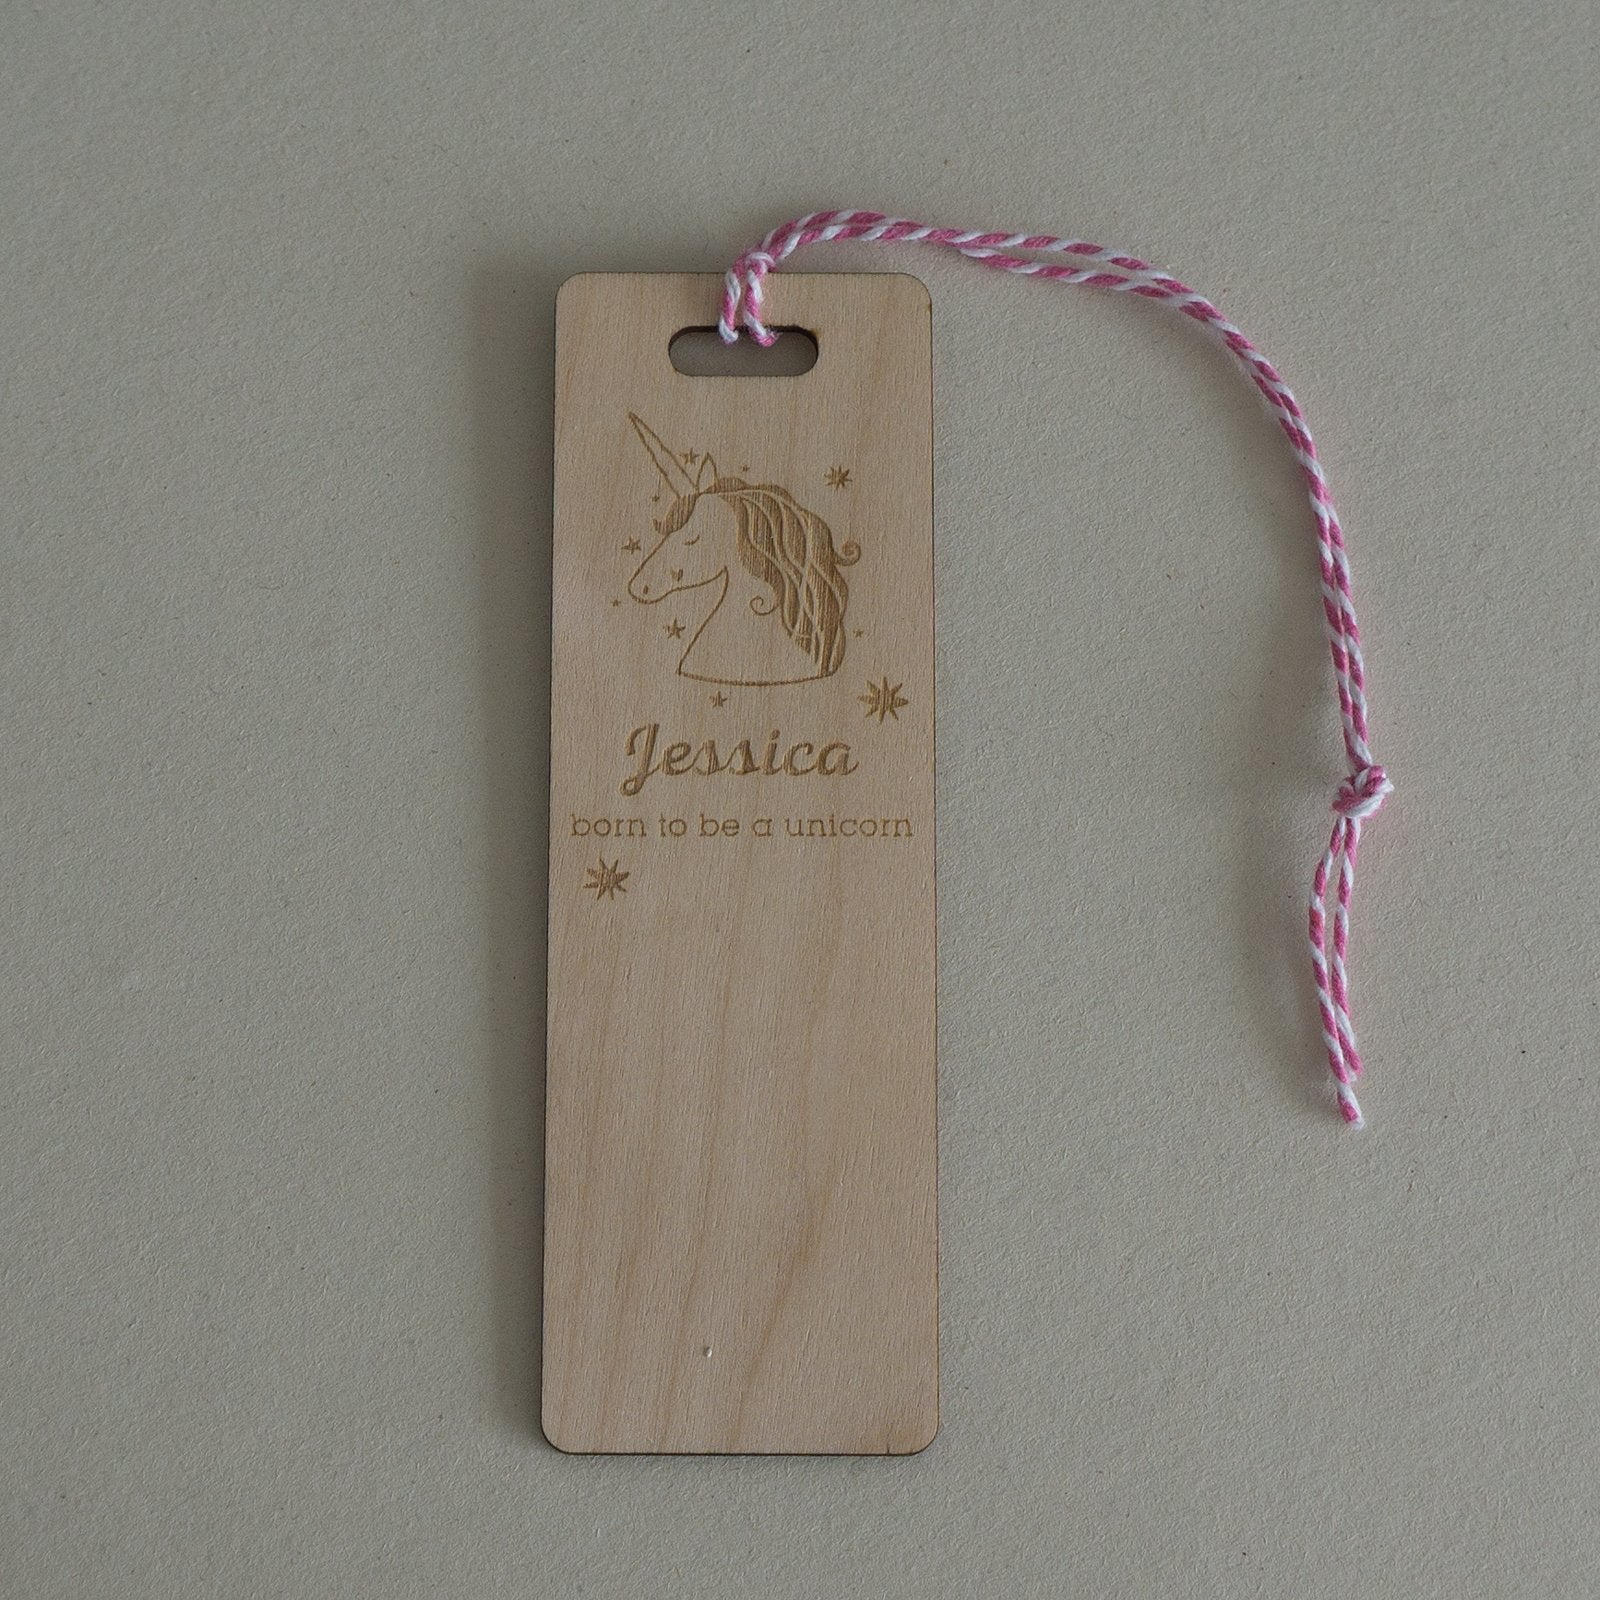 Our engraved bookmarks cane be personalised making them the unique gift for all occasions Belvedere collections.